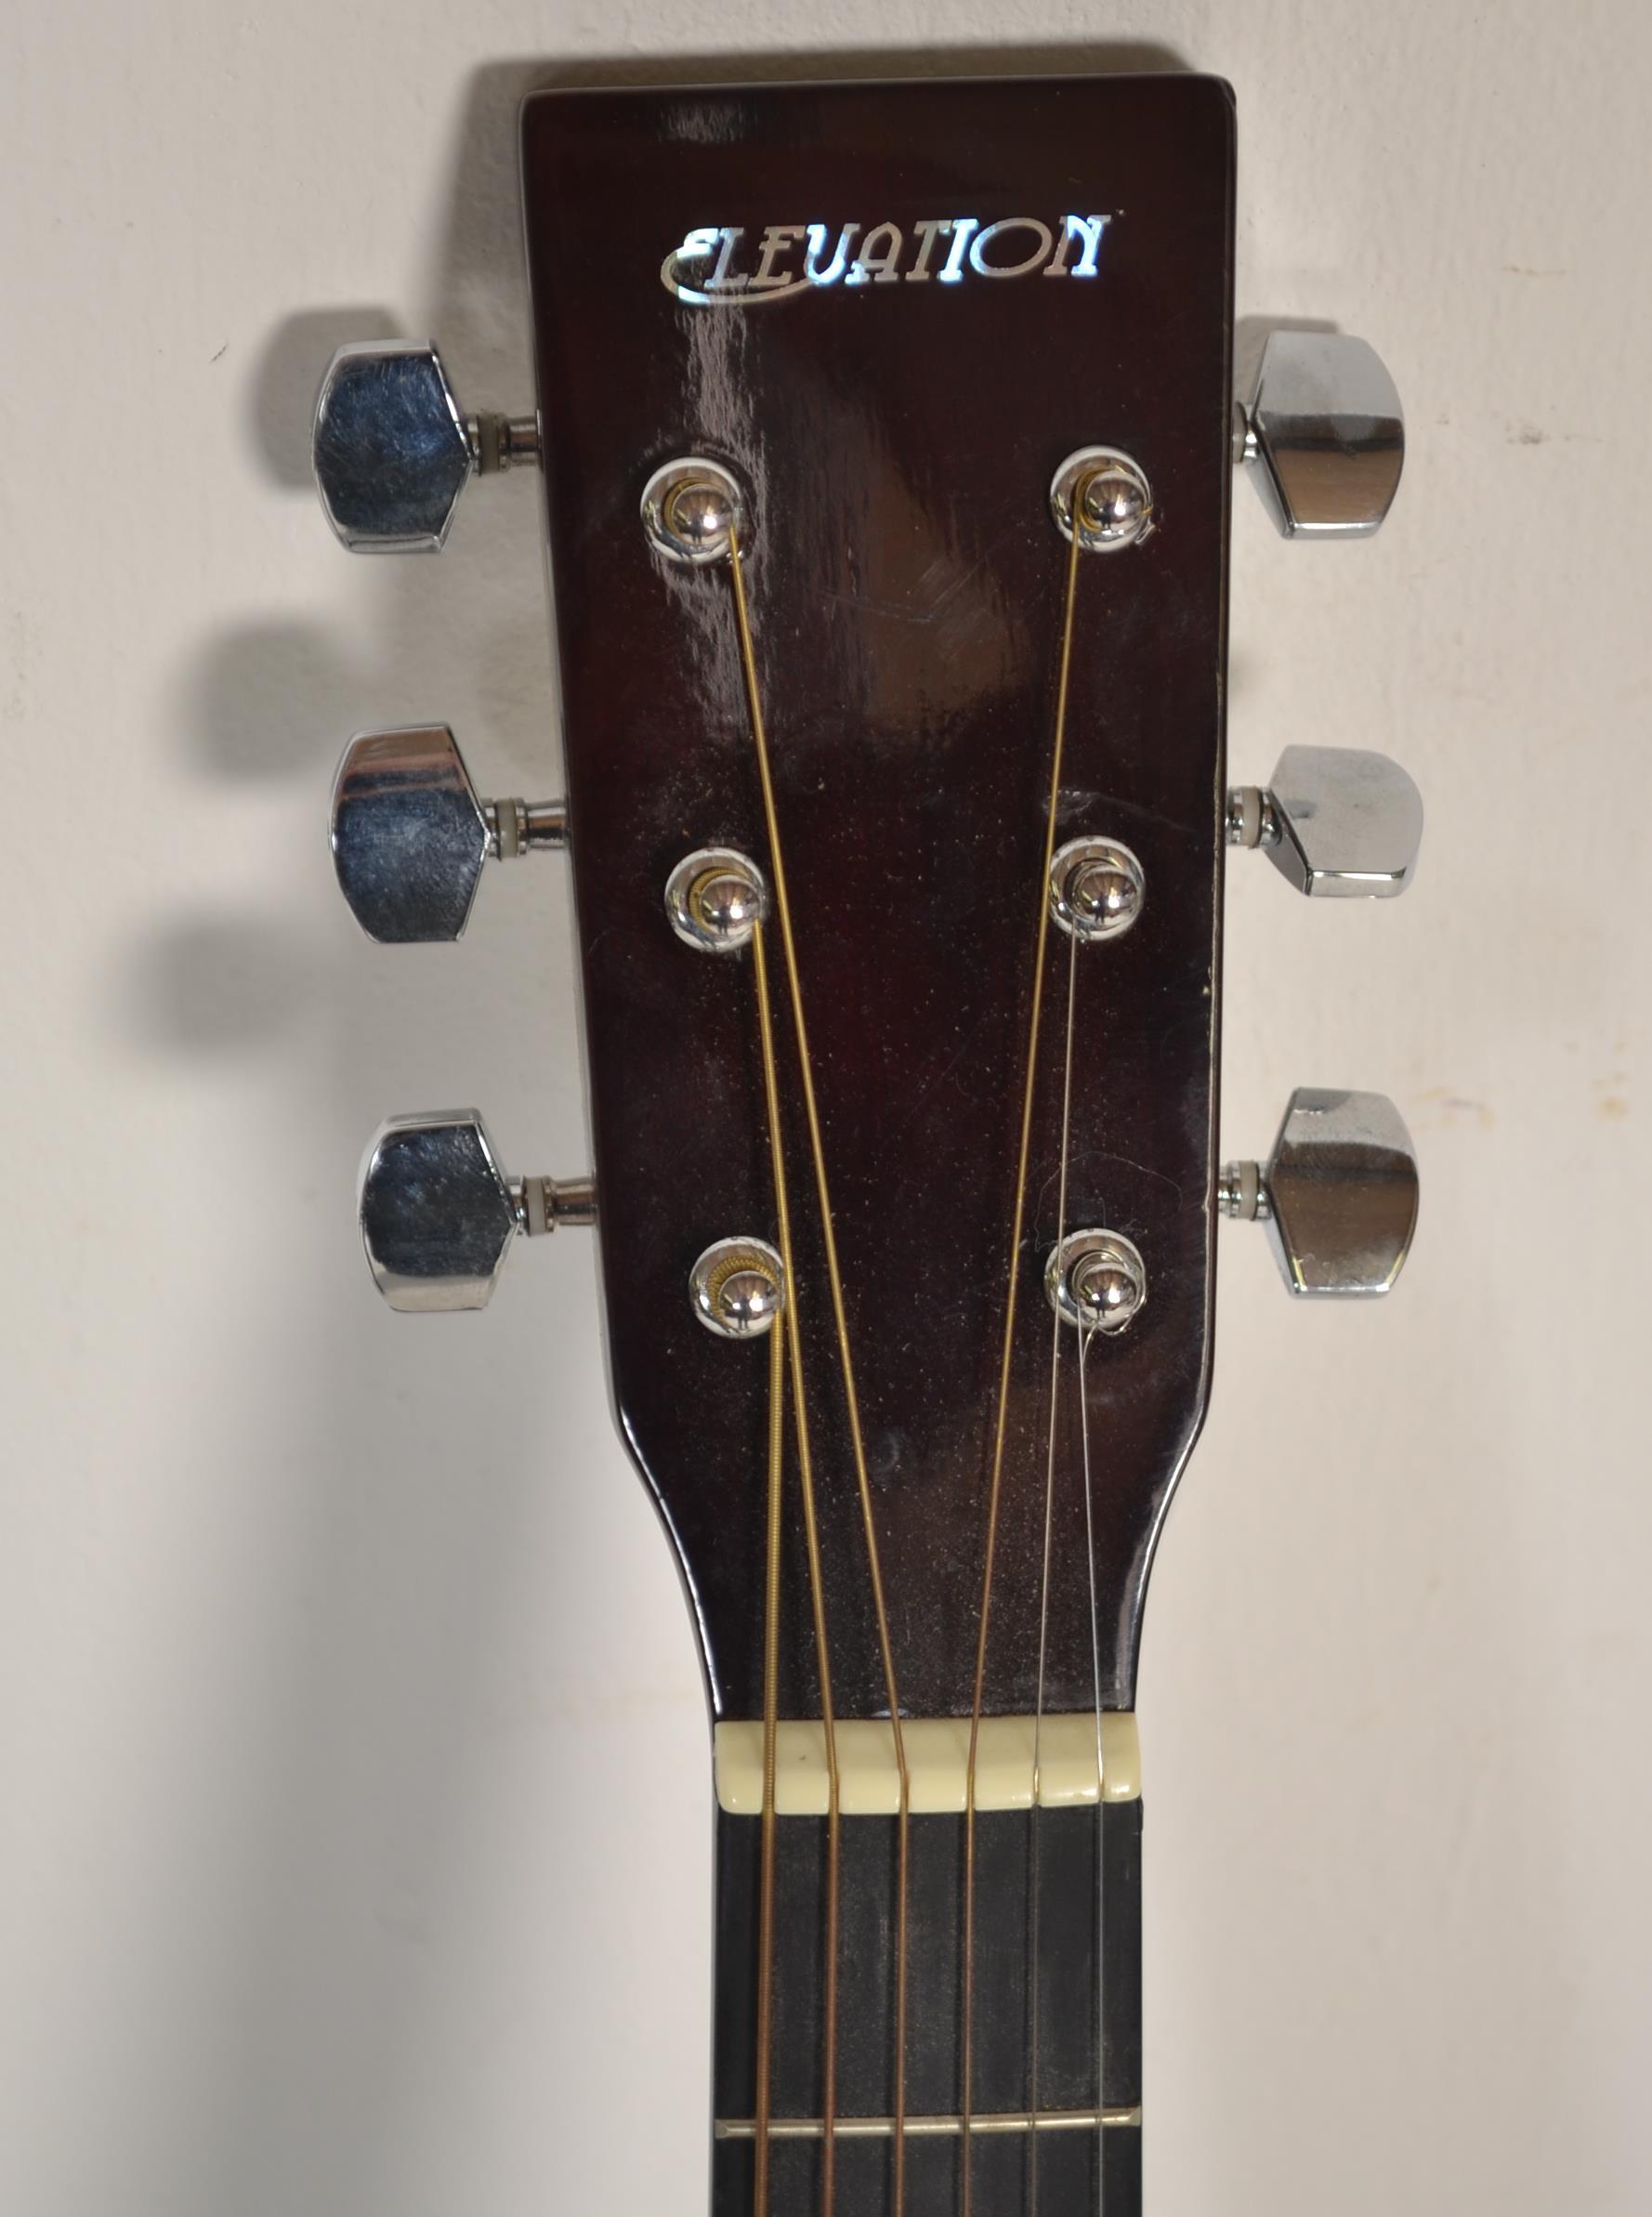 A 20th century ' Elevation ' six string acoustic guitar. Excellent condition, little used. - Image 2 of 5